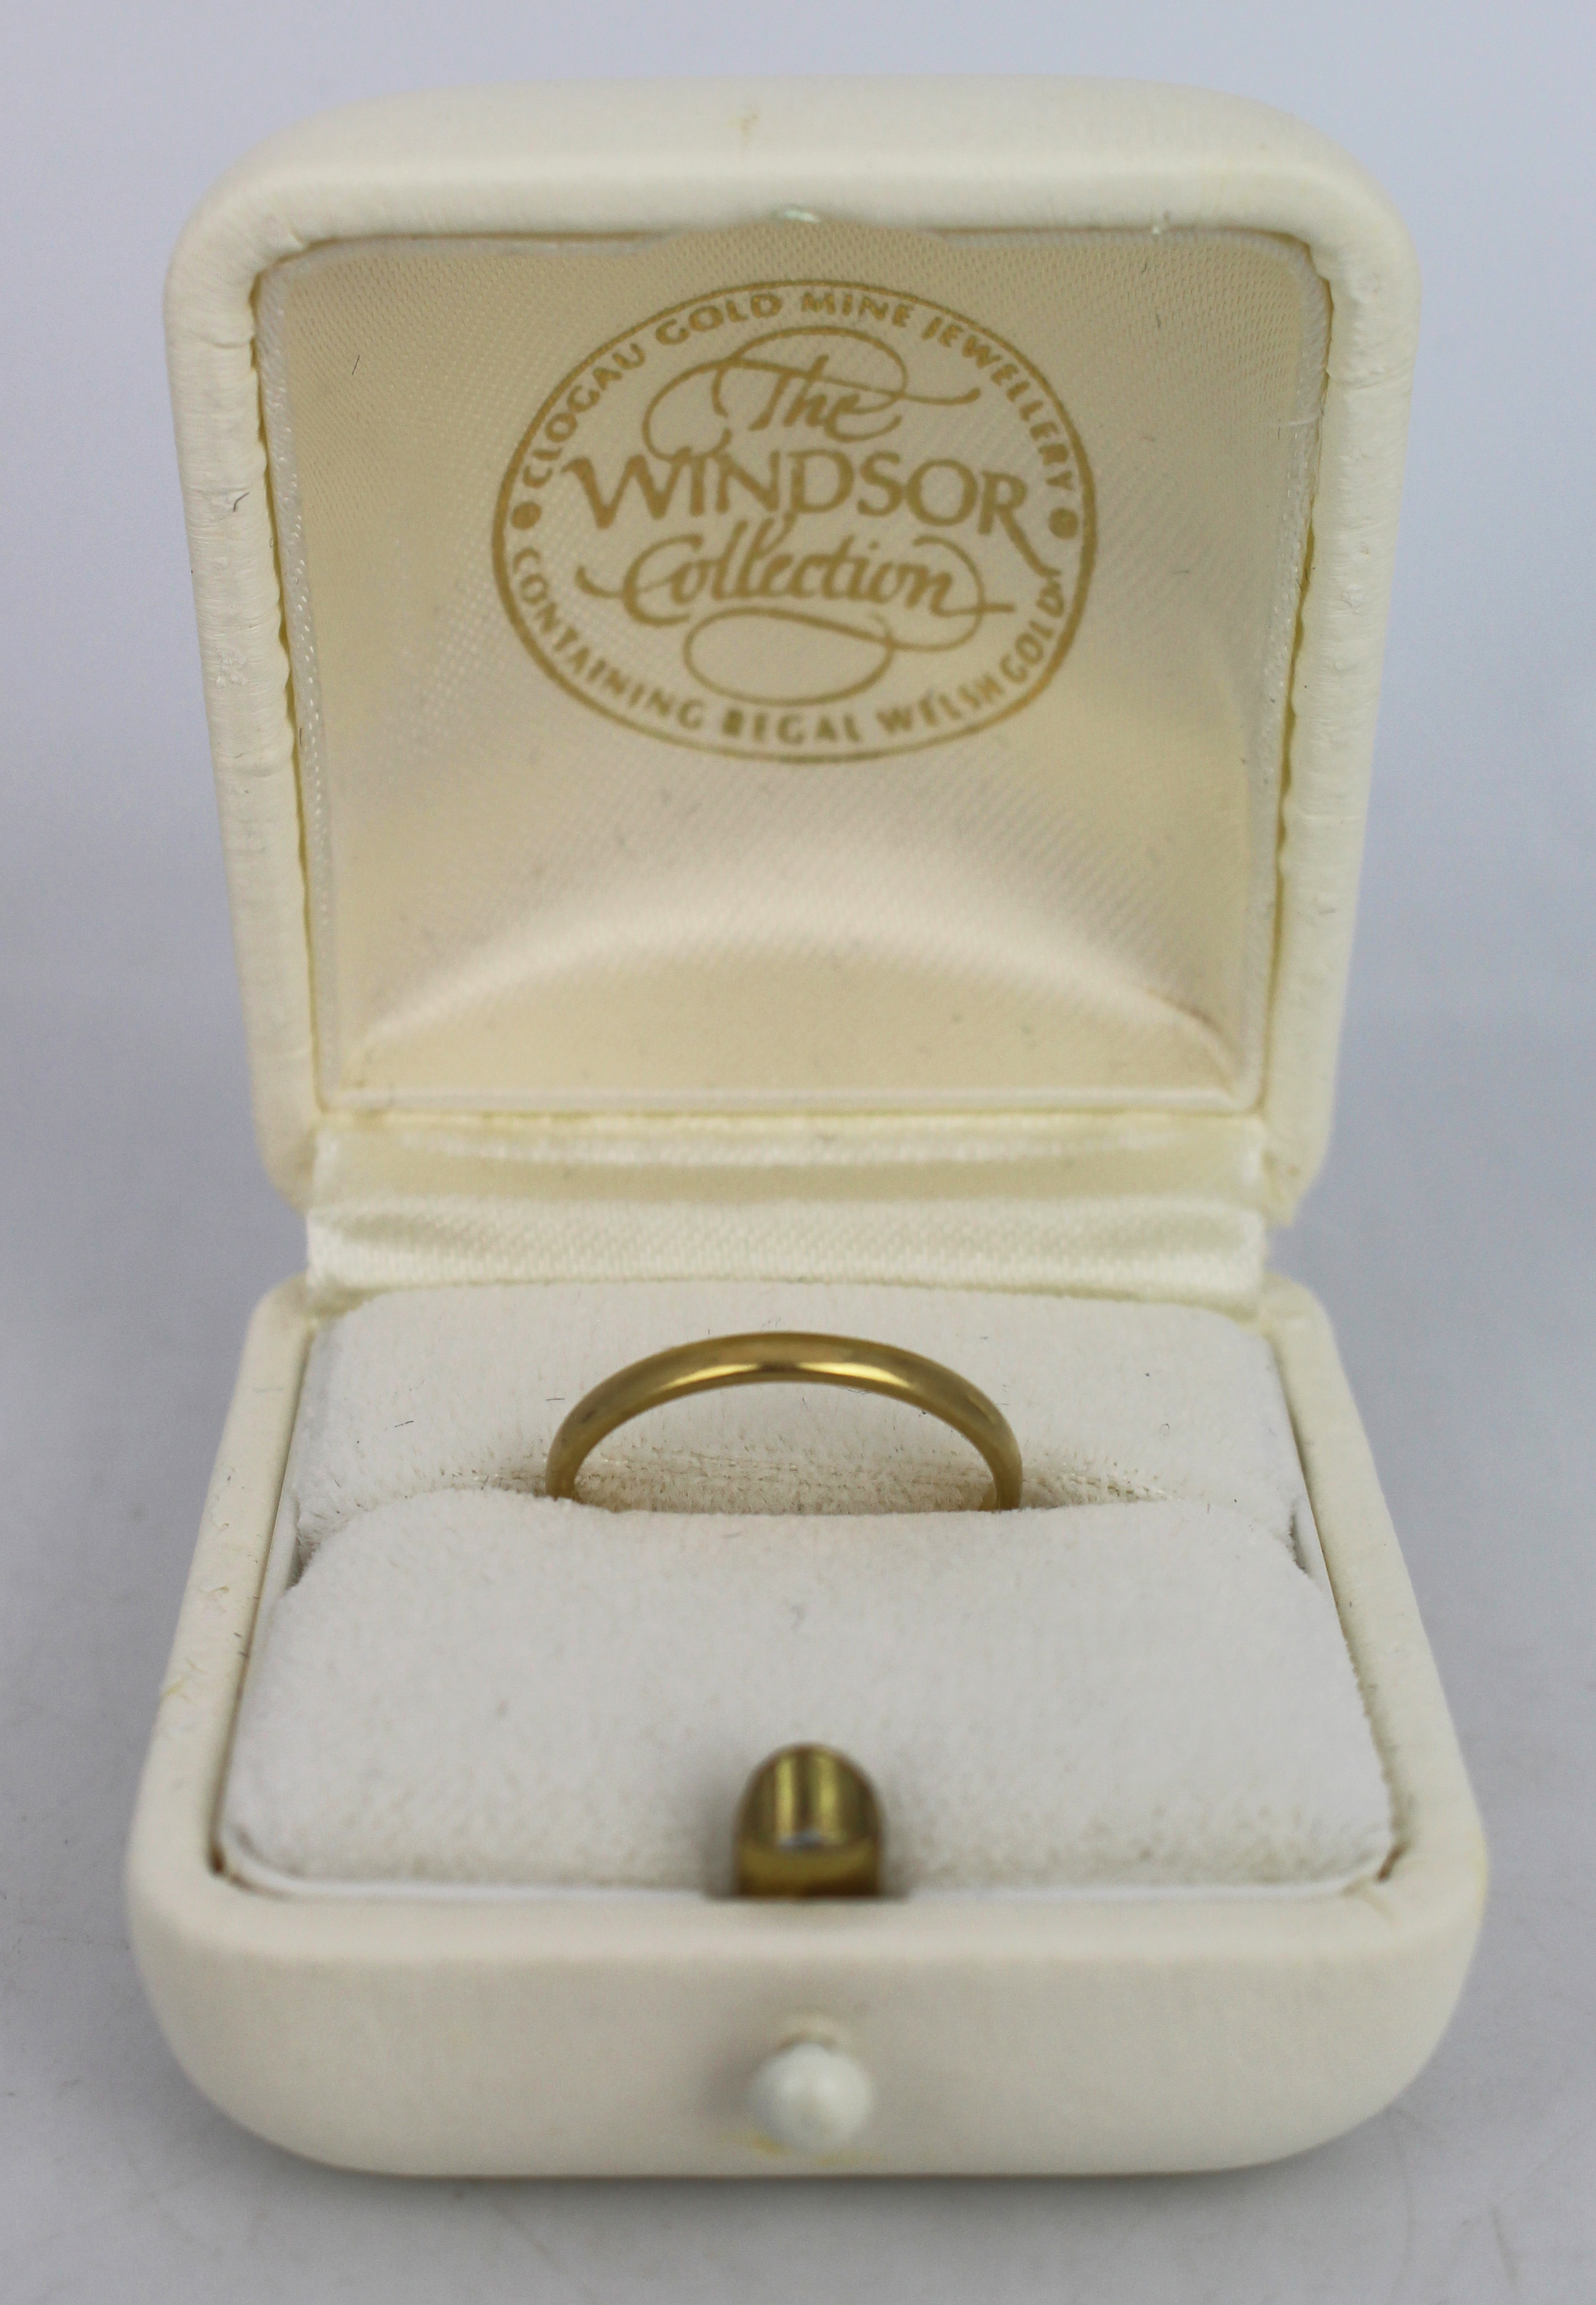 The Windsor Collection Clogau 18ct Gold Ring - Image 2 of 2